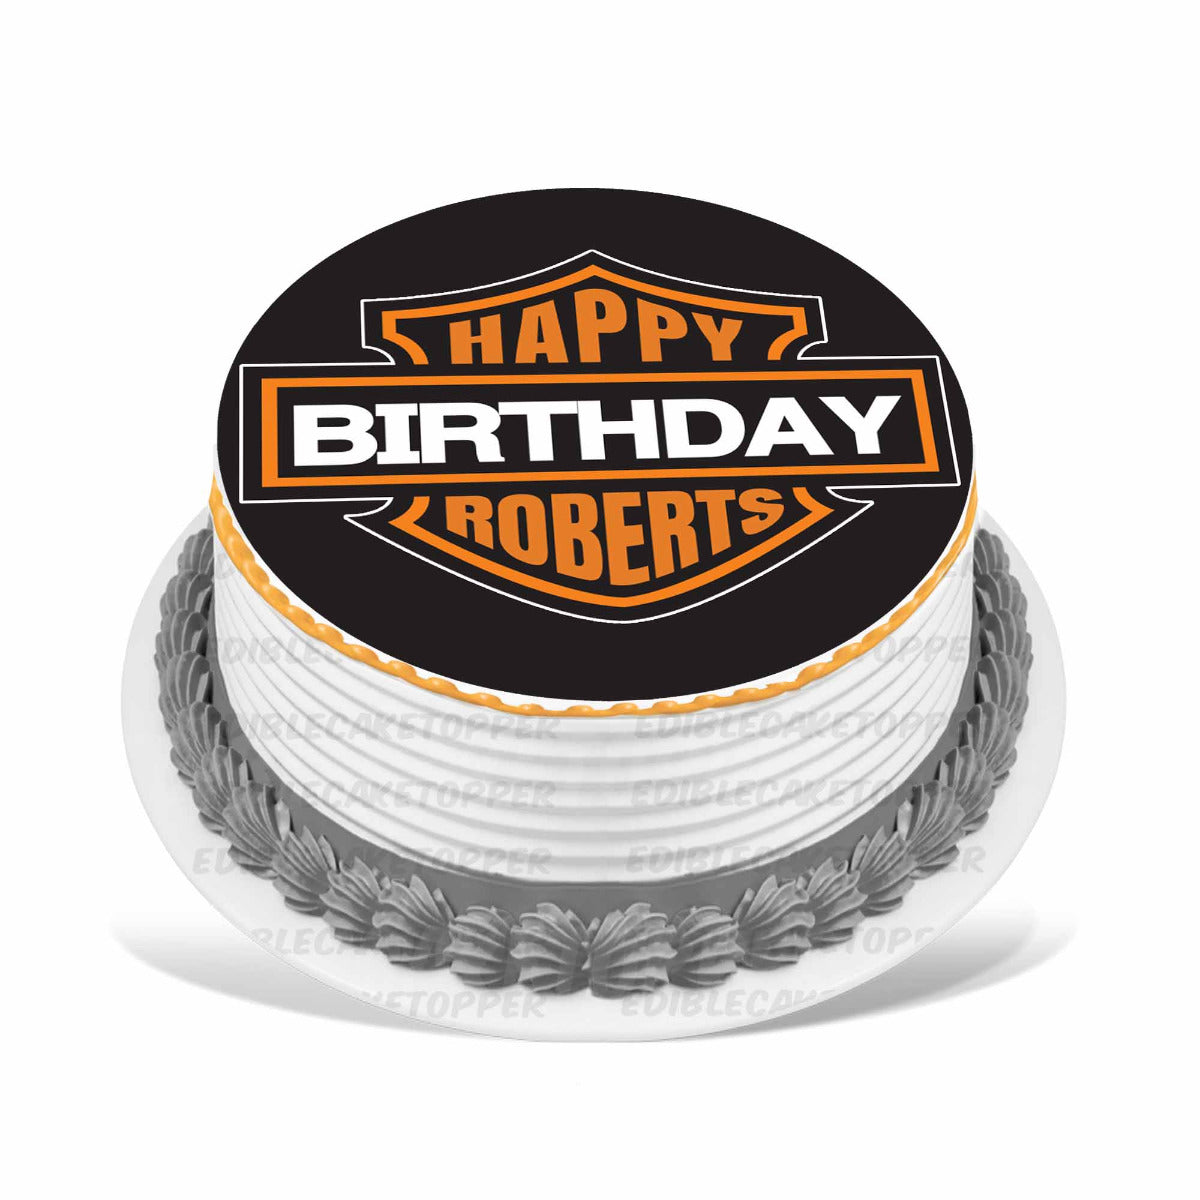 Harley Davidson Themed Cake – Eat With Etiquette